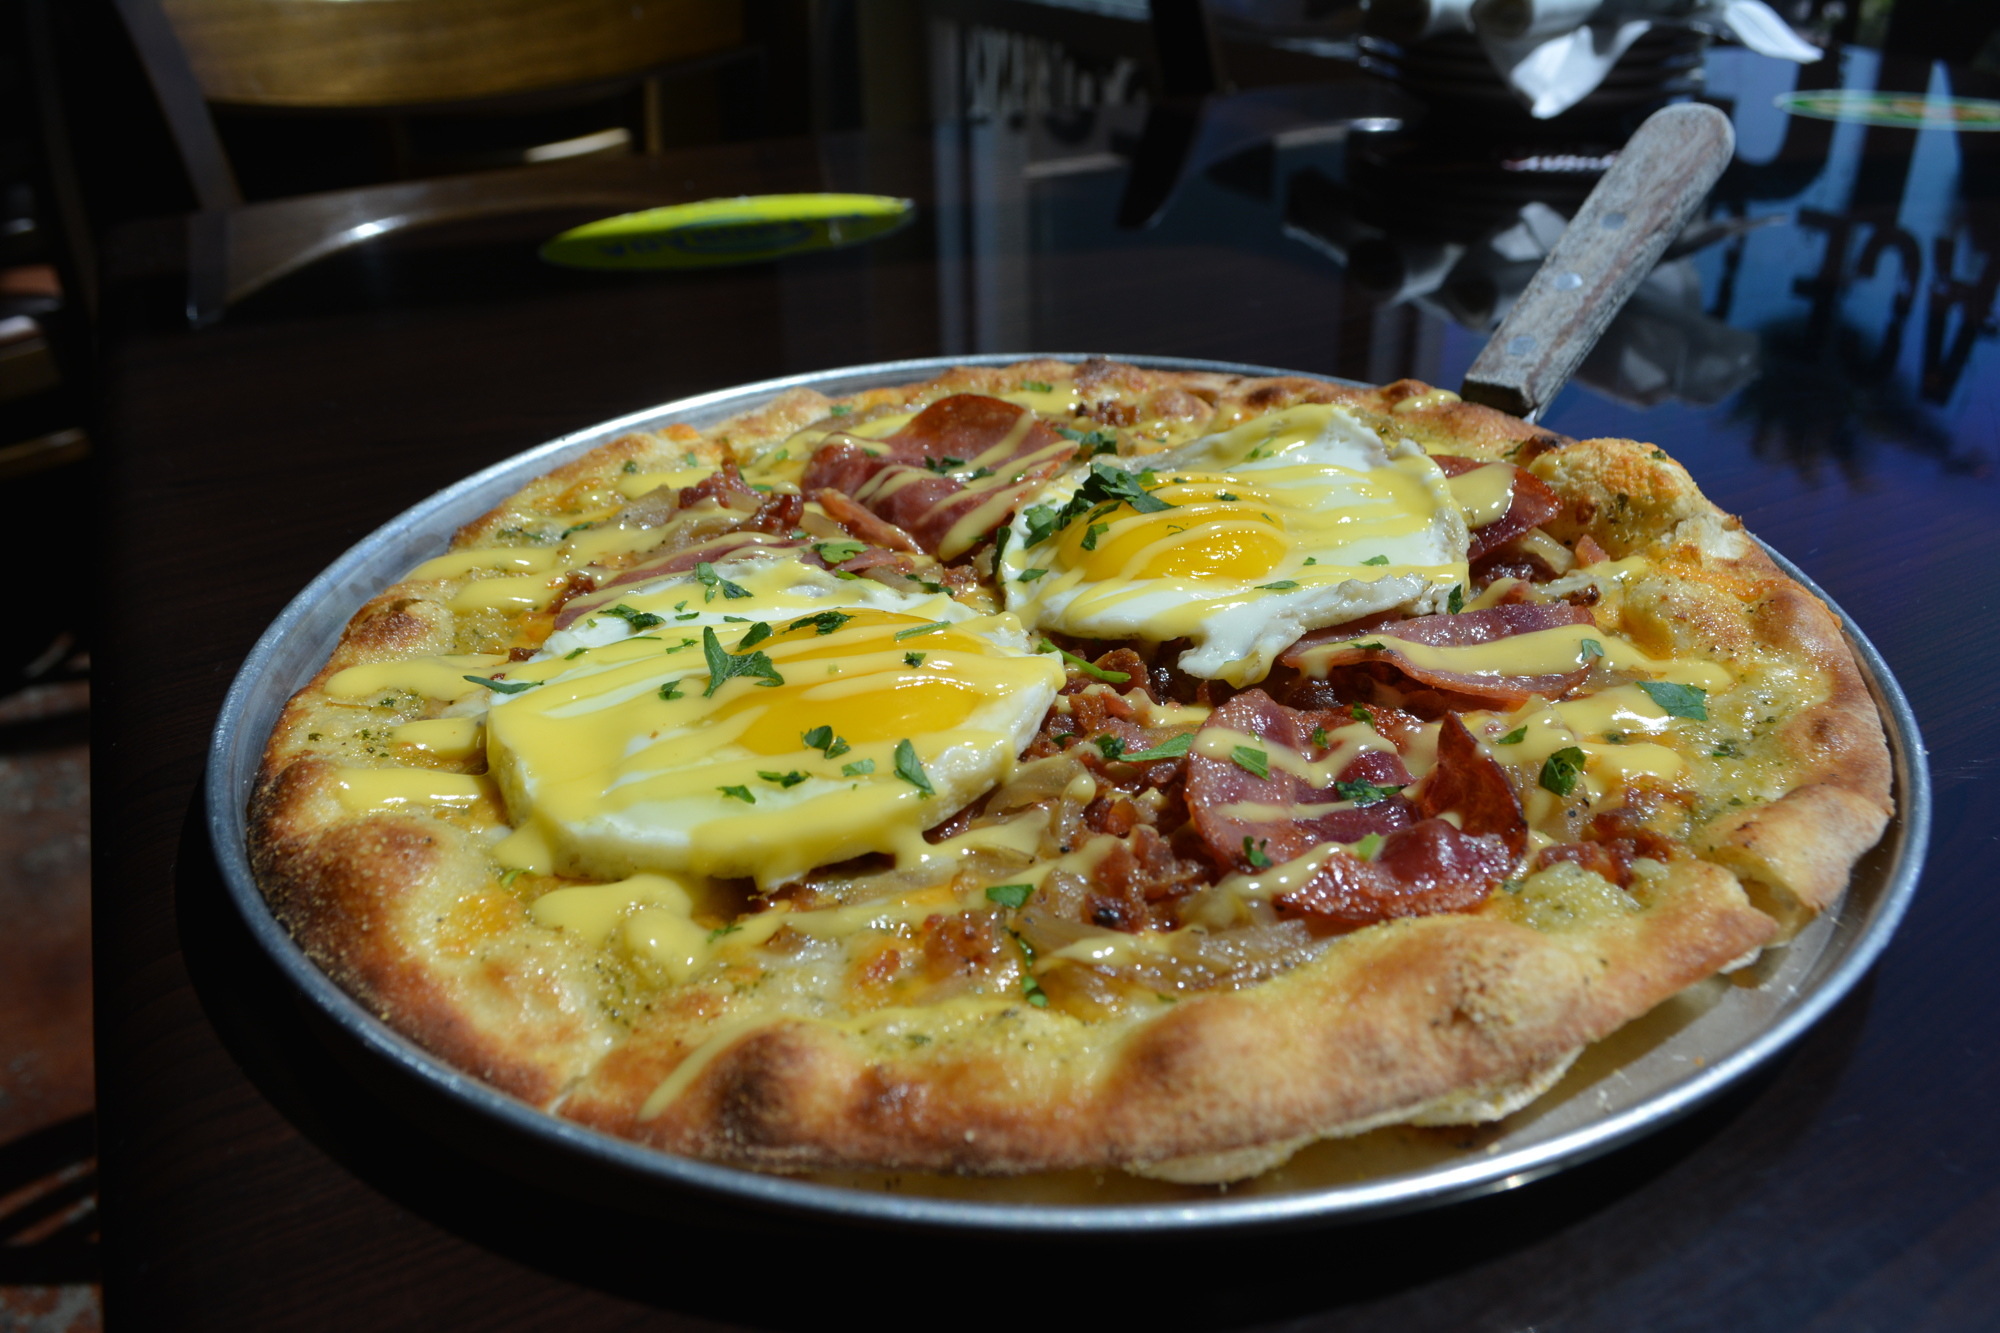 Eggs on pizza? The Benedict has become so popular it was added to the regular menu.